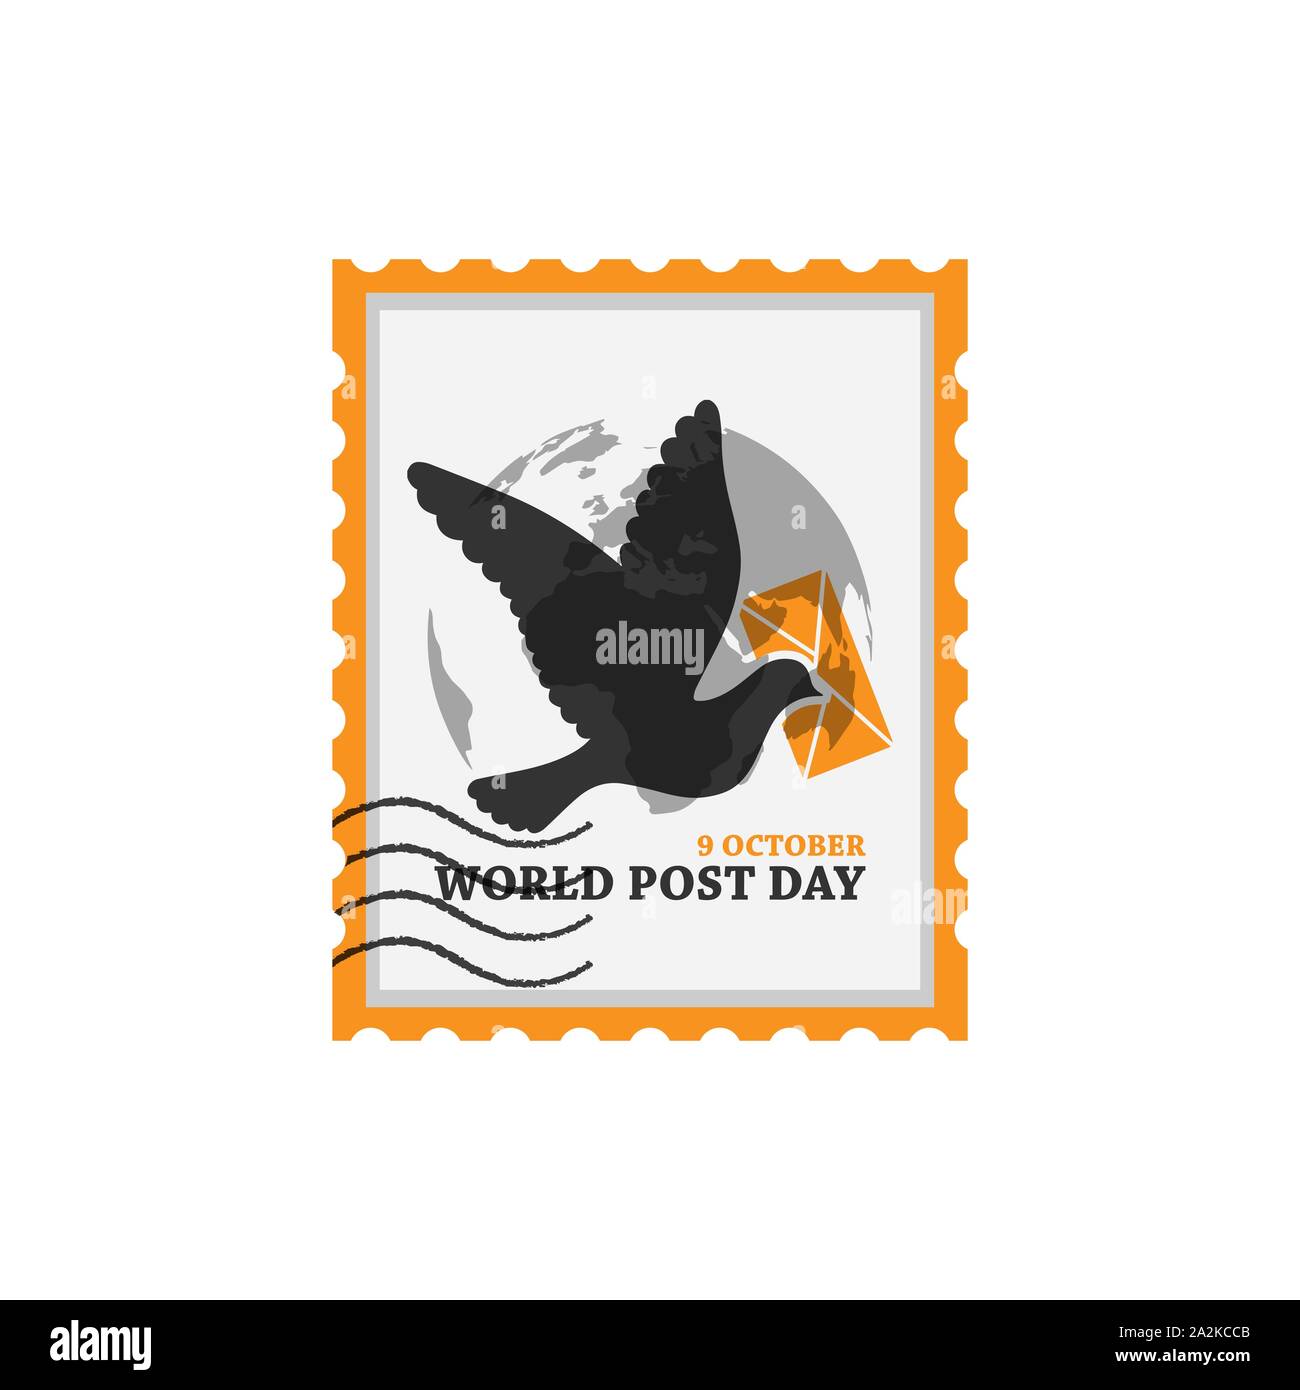 9 october world post day vector design image. world post day with postage image vector Stock Vector